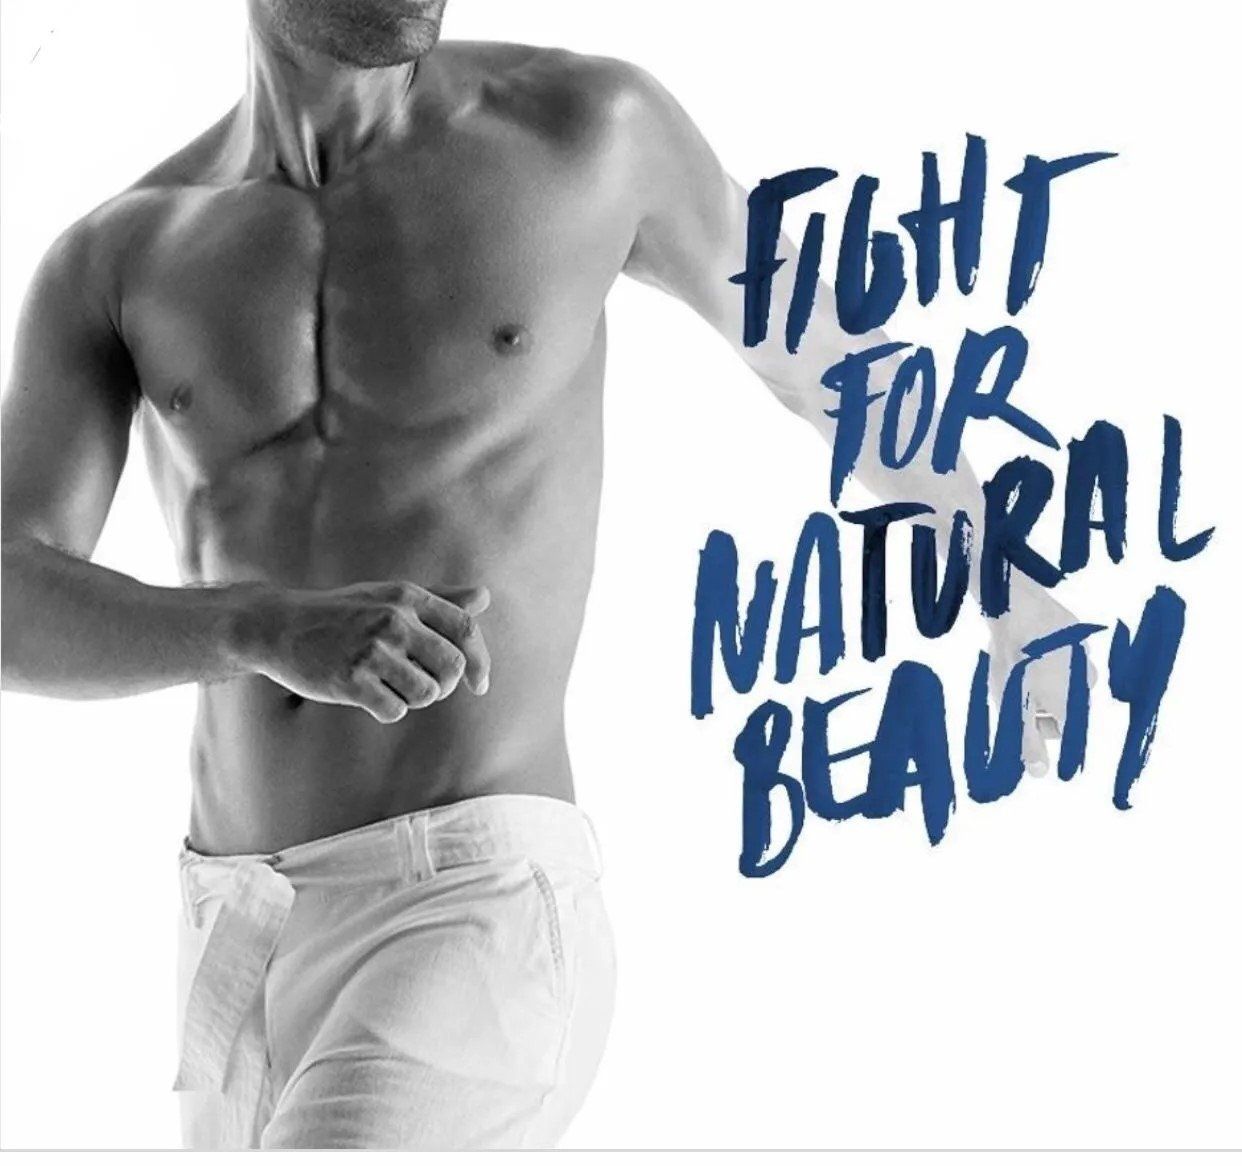 Fight for natural beauty